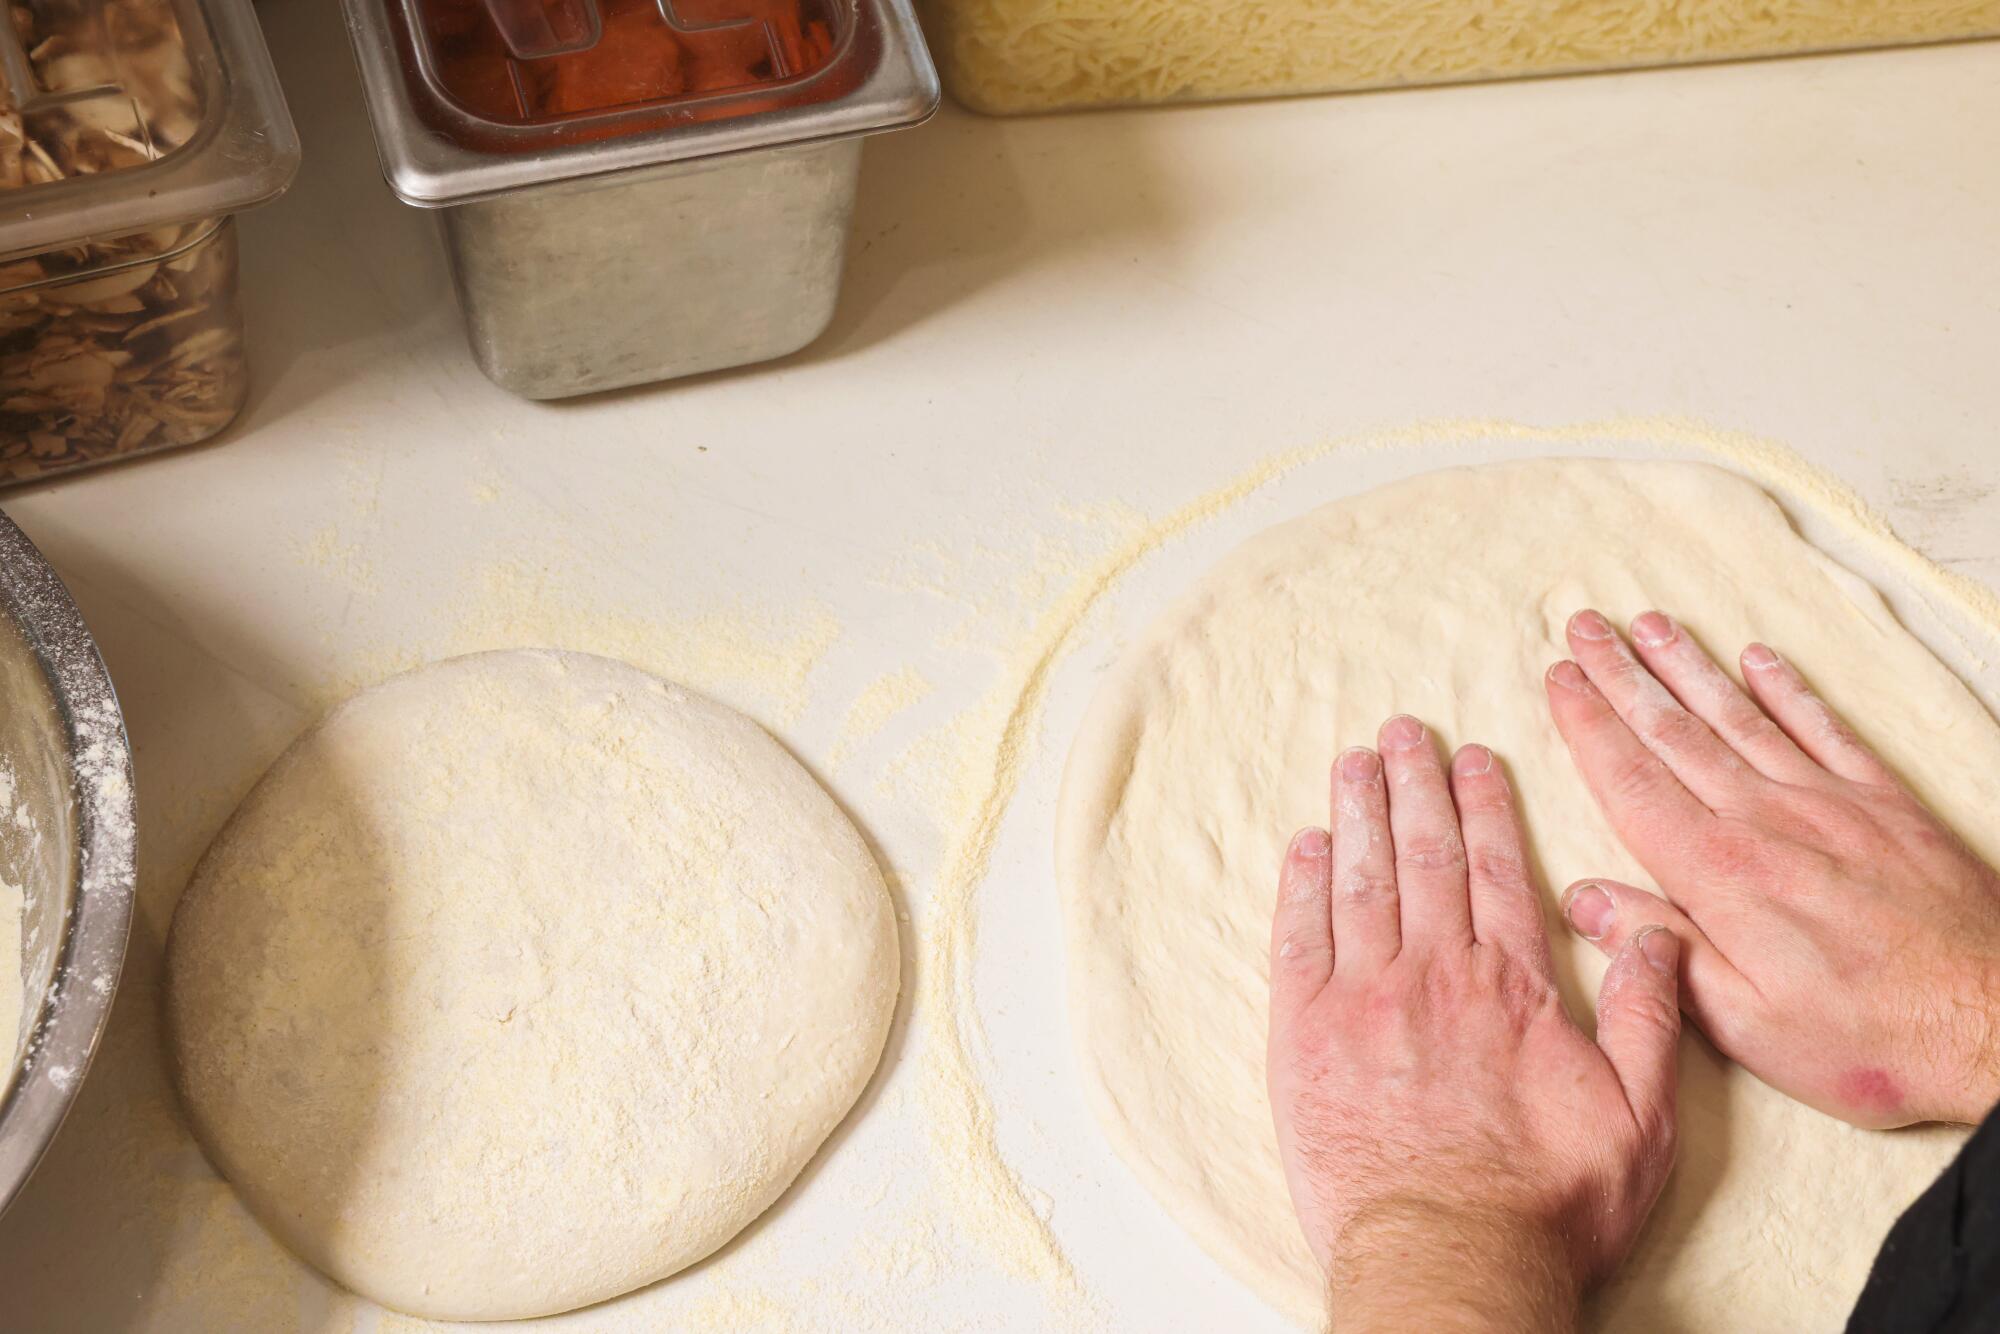 A man's hands shape dough into flat circles for pizza.